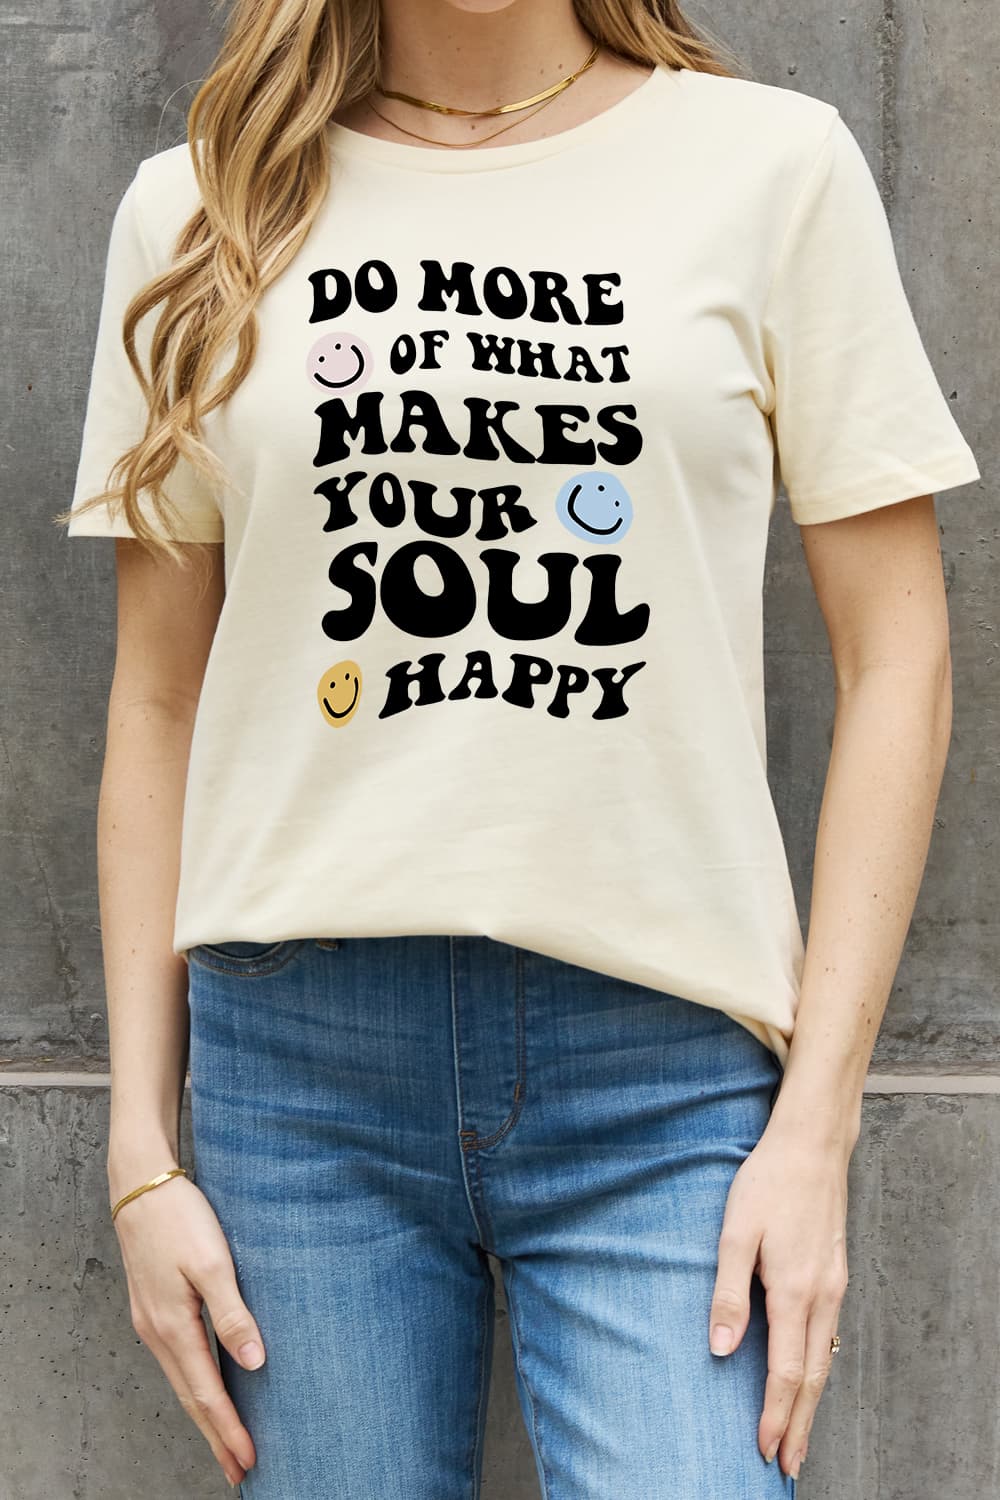 Full Size Do More of What Makes Your Soul Happy Slogan Graphic Cotton Tee